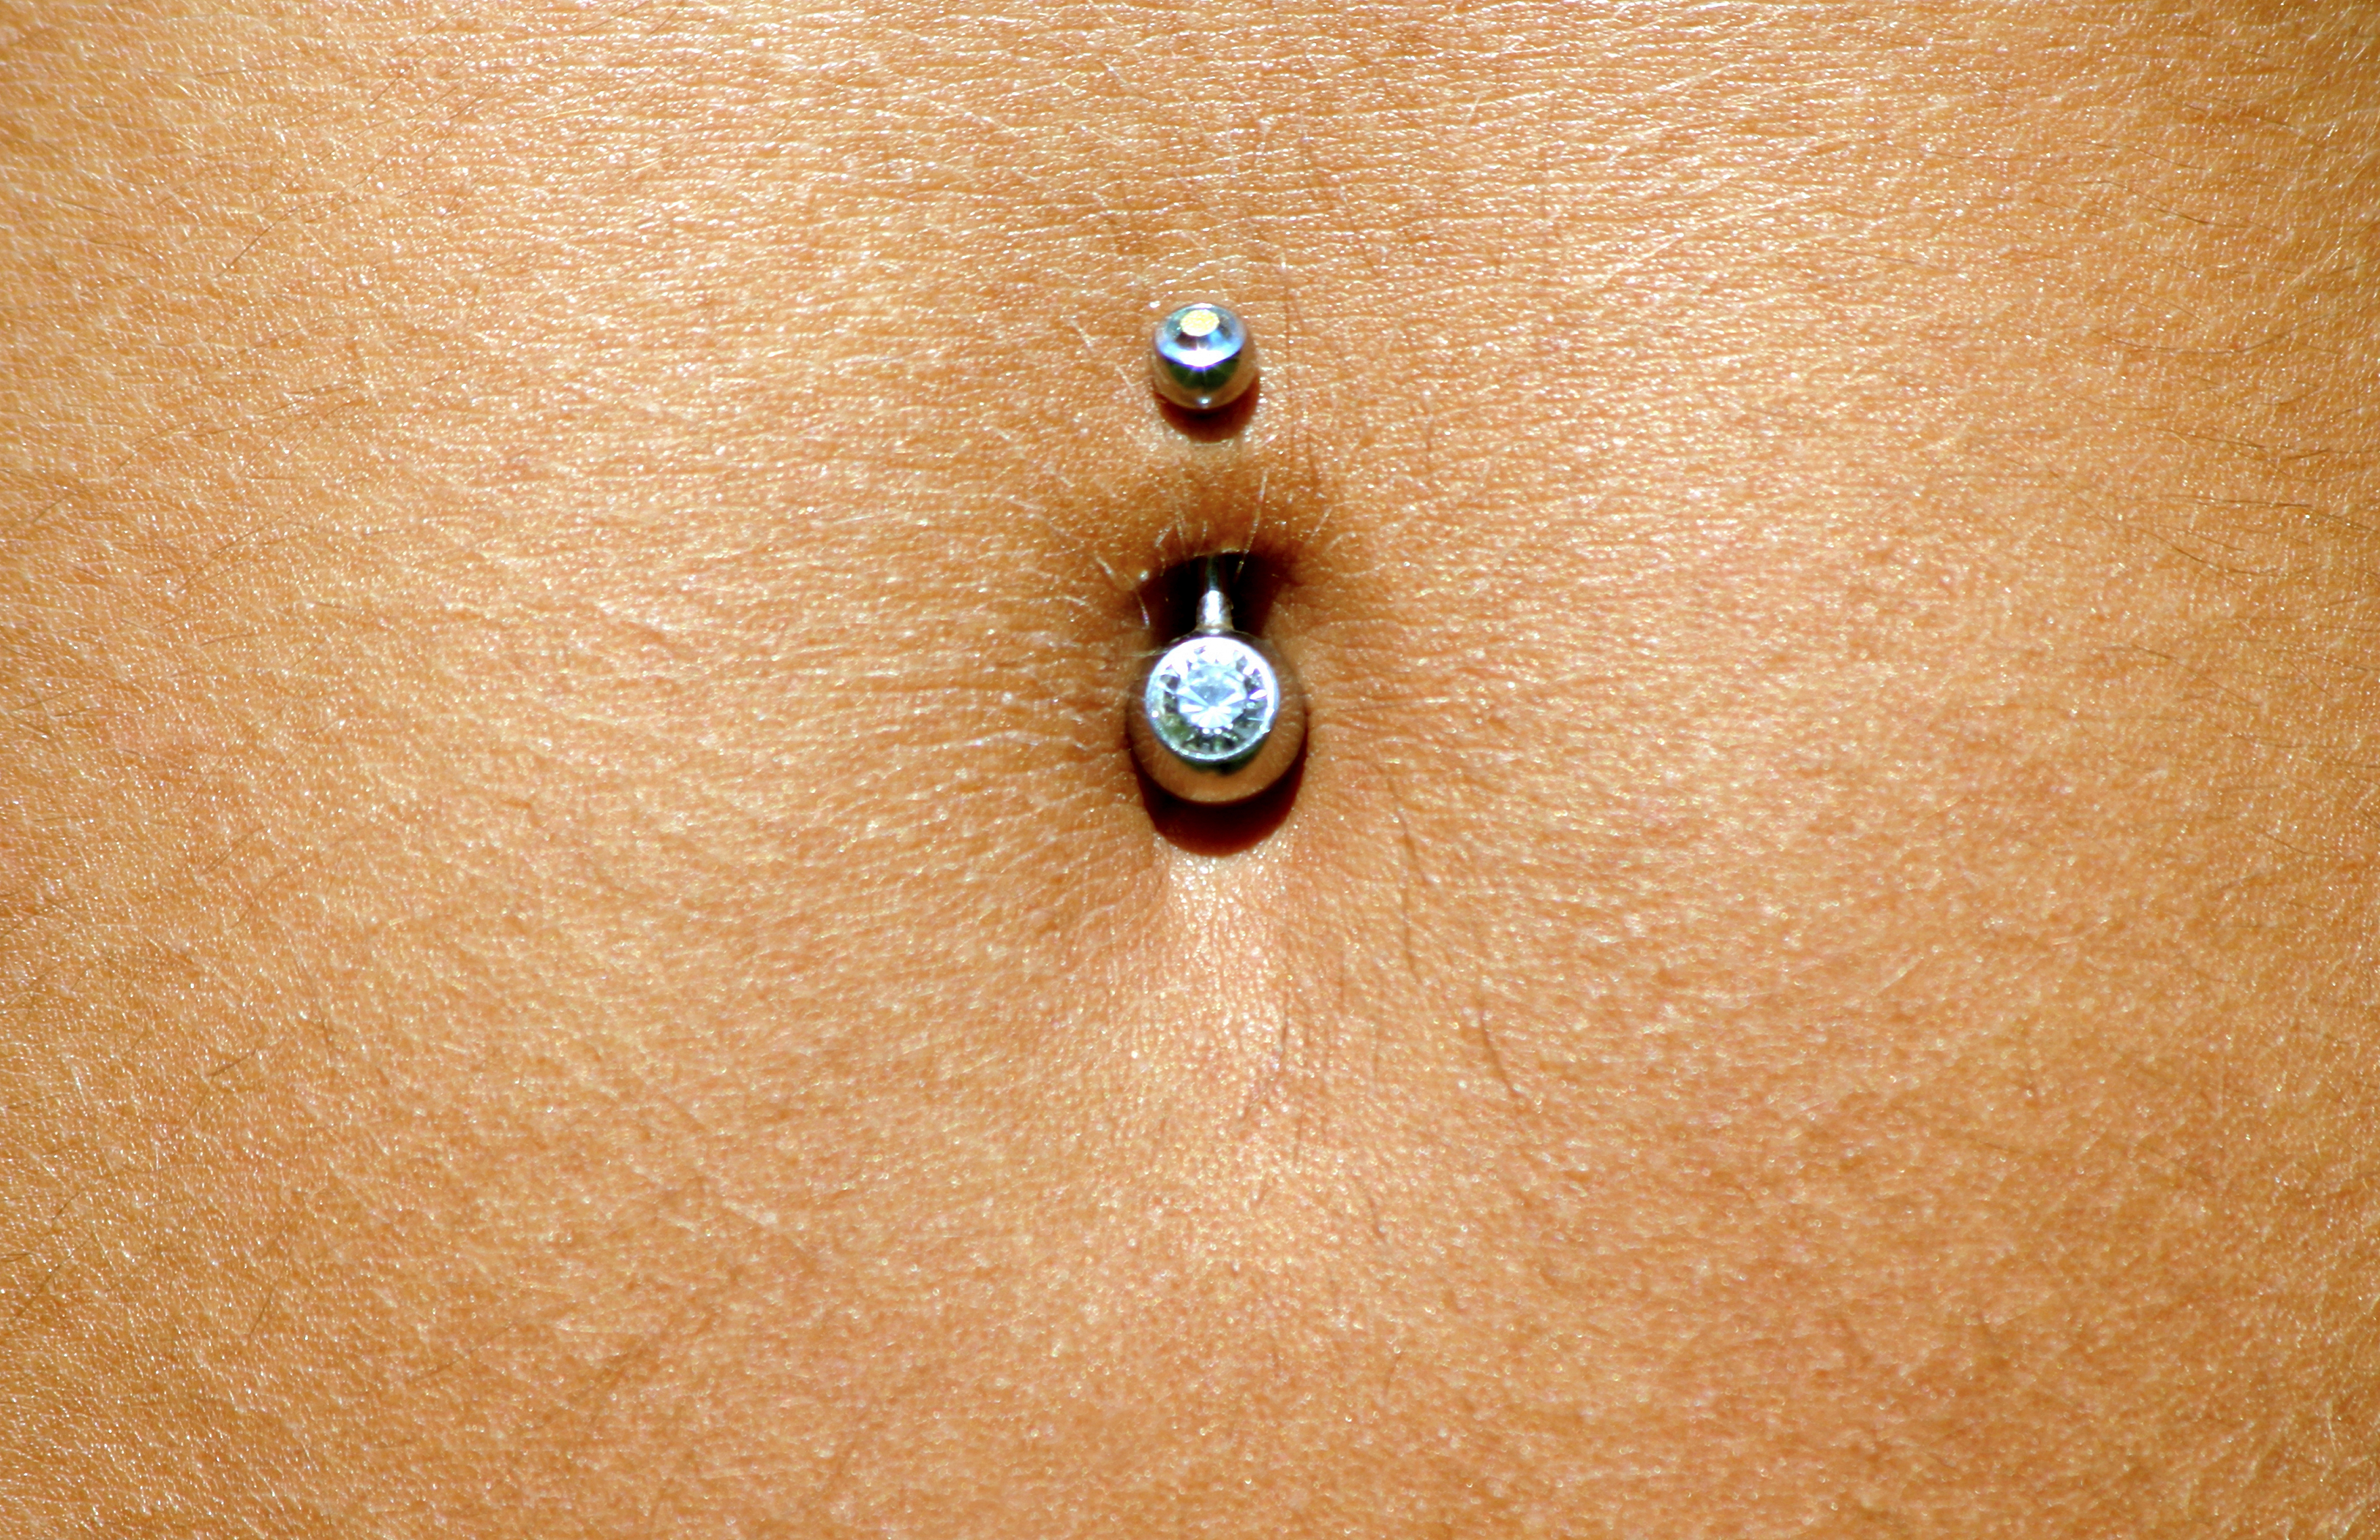 amarjit nagra share pictures of belly button piercing photos